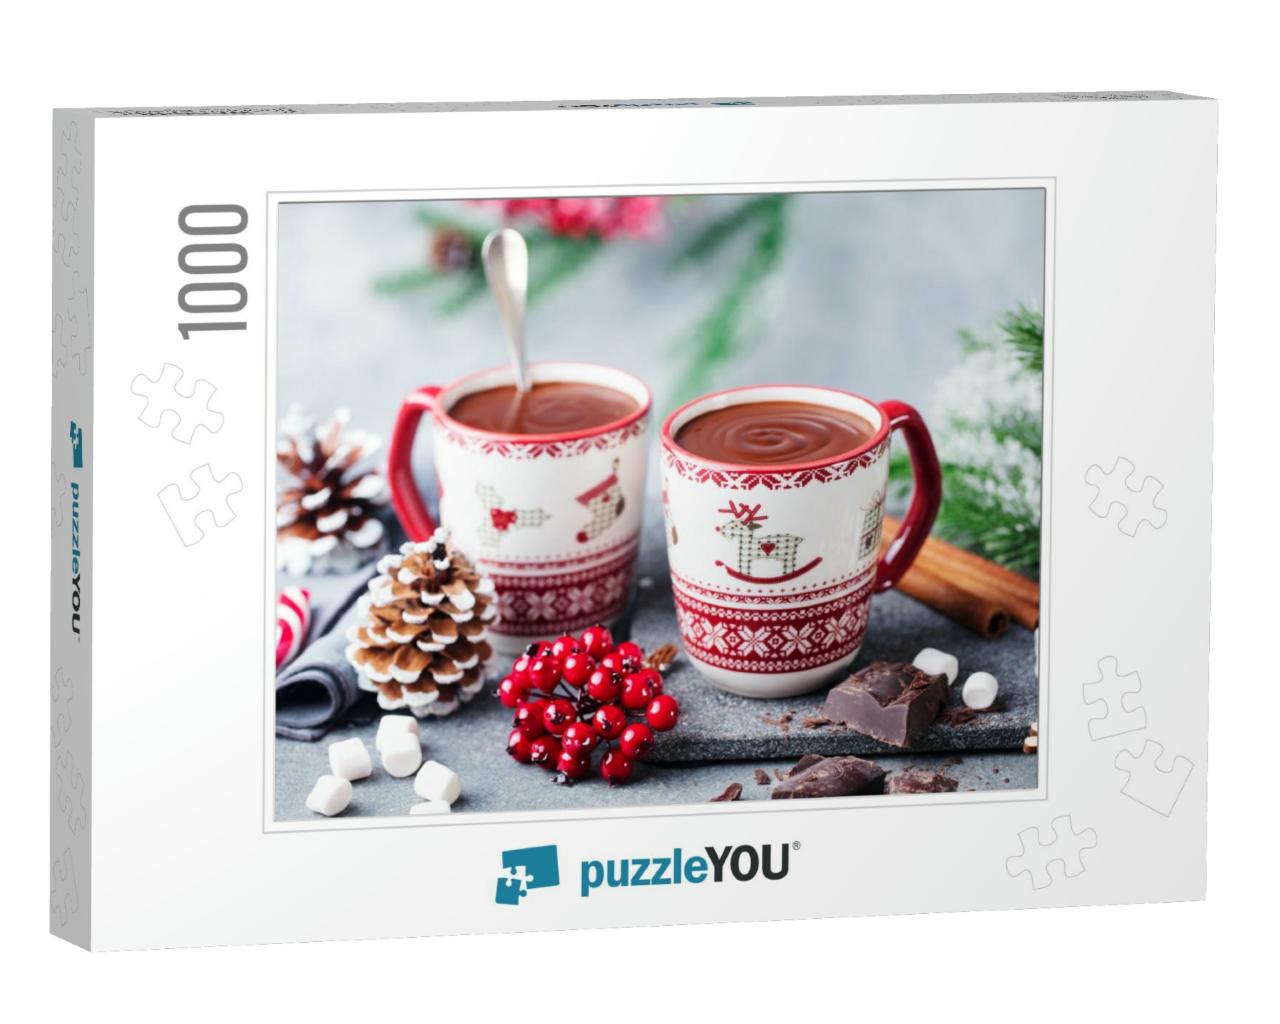 Hot Chocolate with Marshmallows in Christmas Mugs on Grey... Jigsaw Puzzle with 1000 pieces